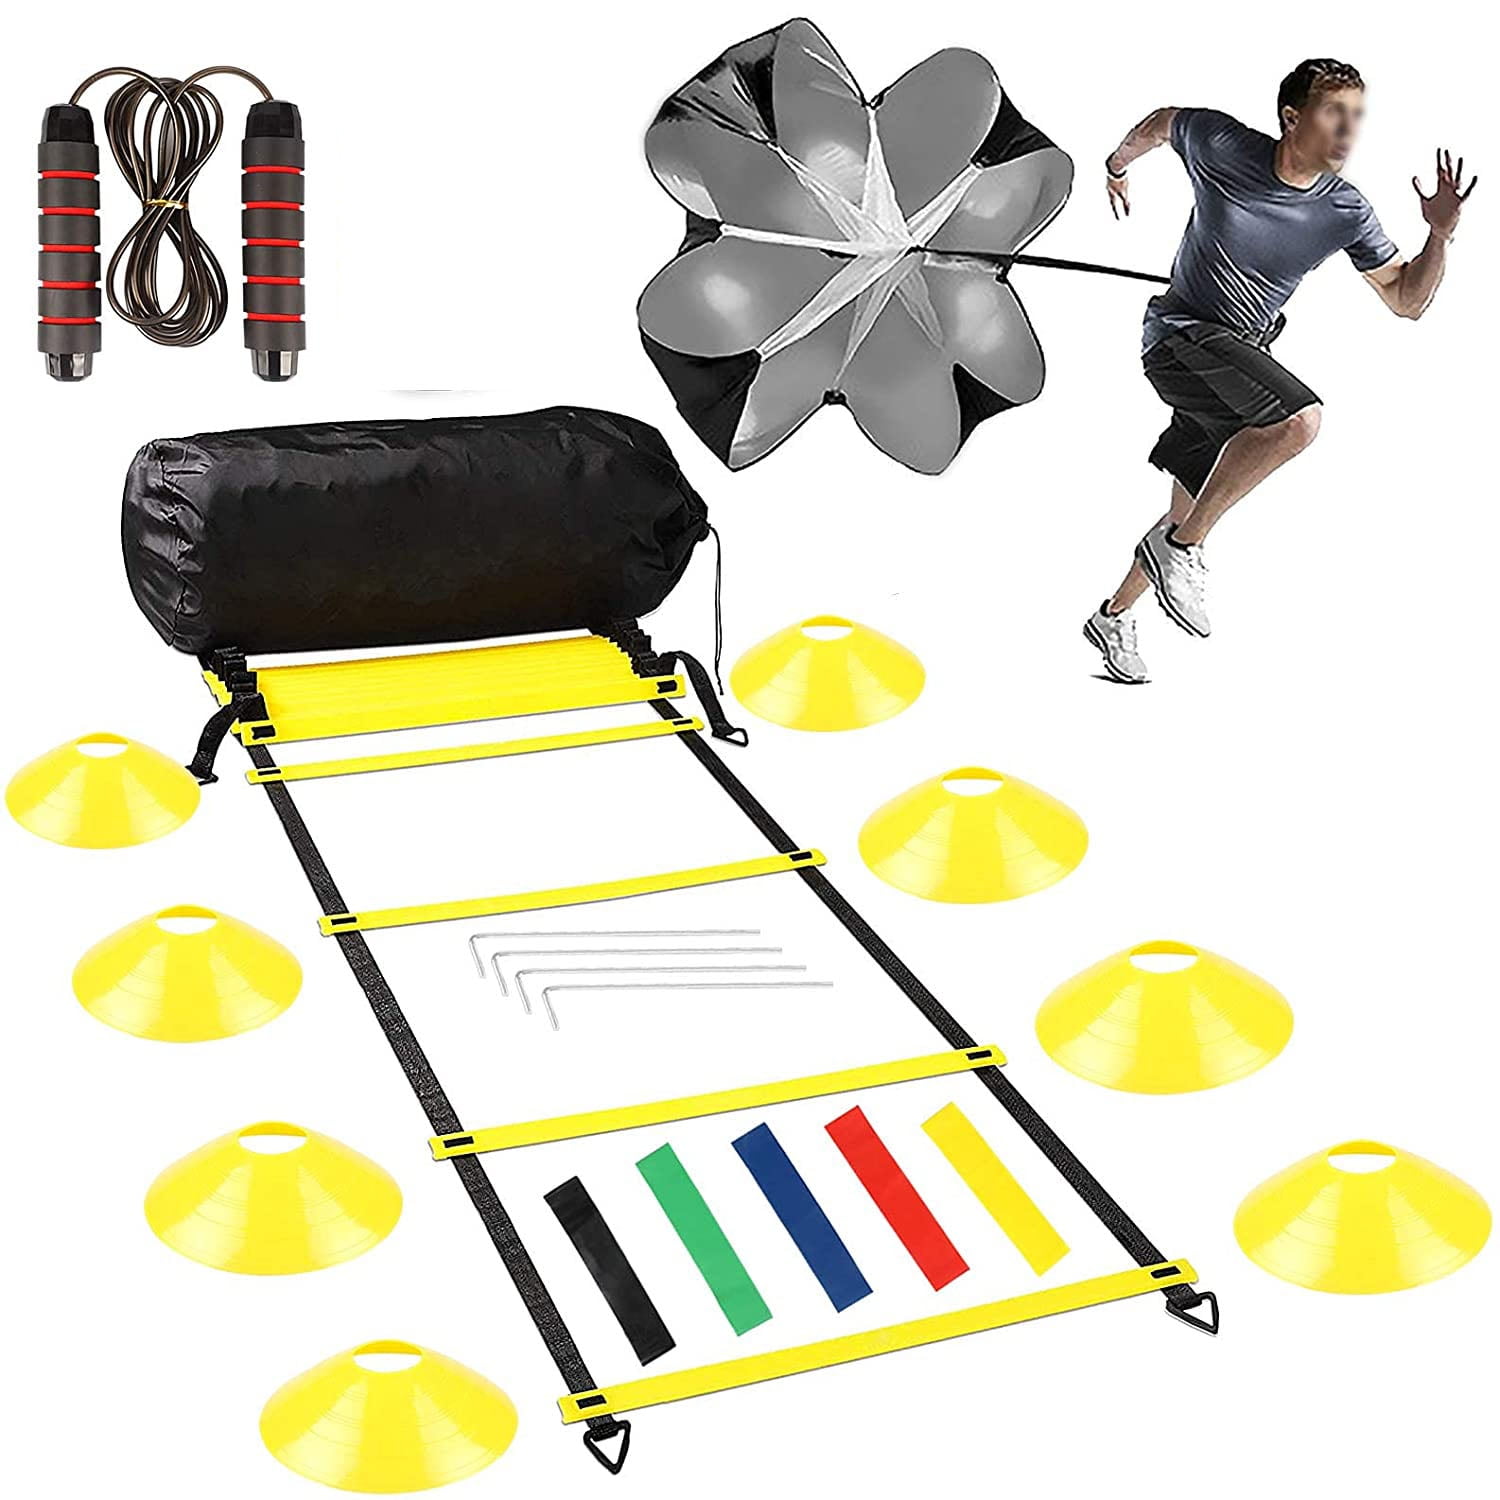 Speed Agility Ladder Football Sports Training Exercise Equipment 